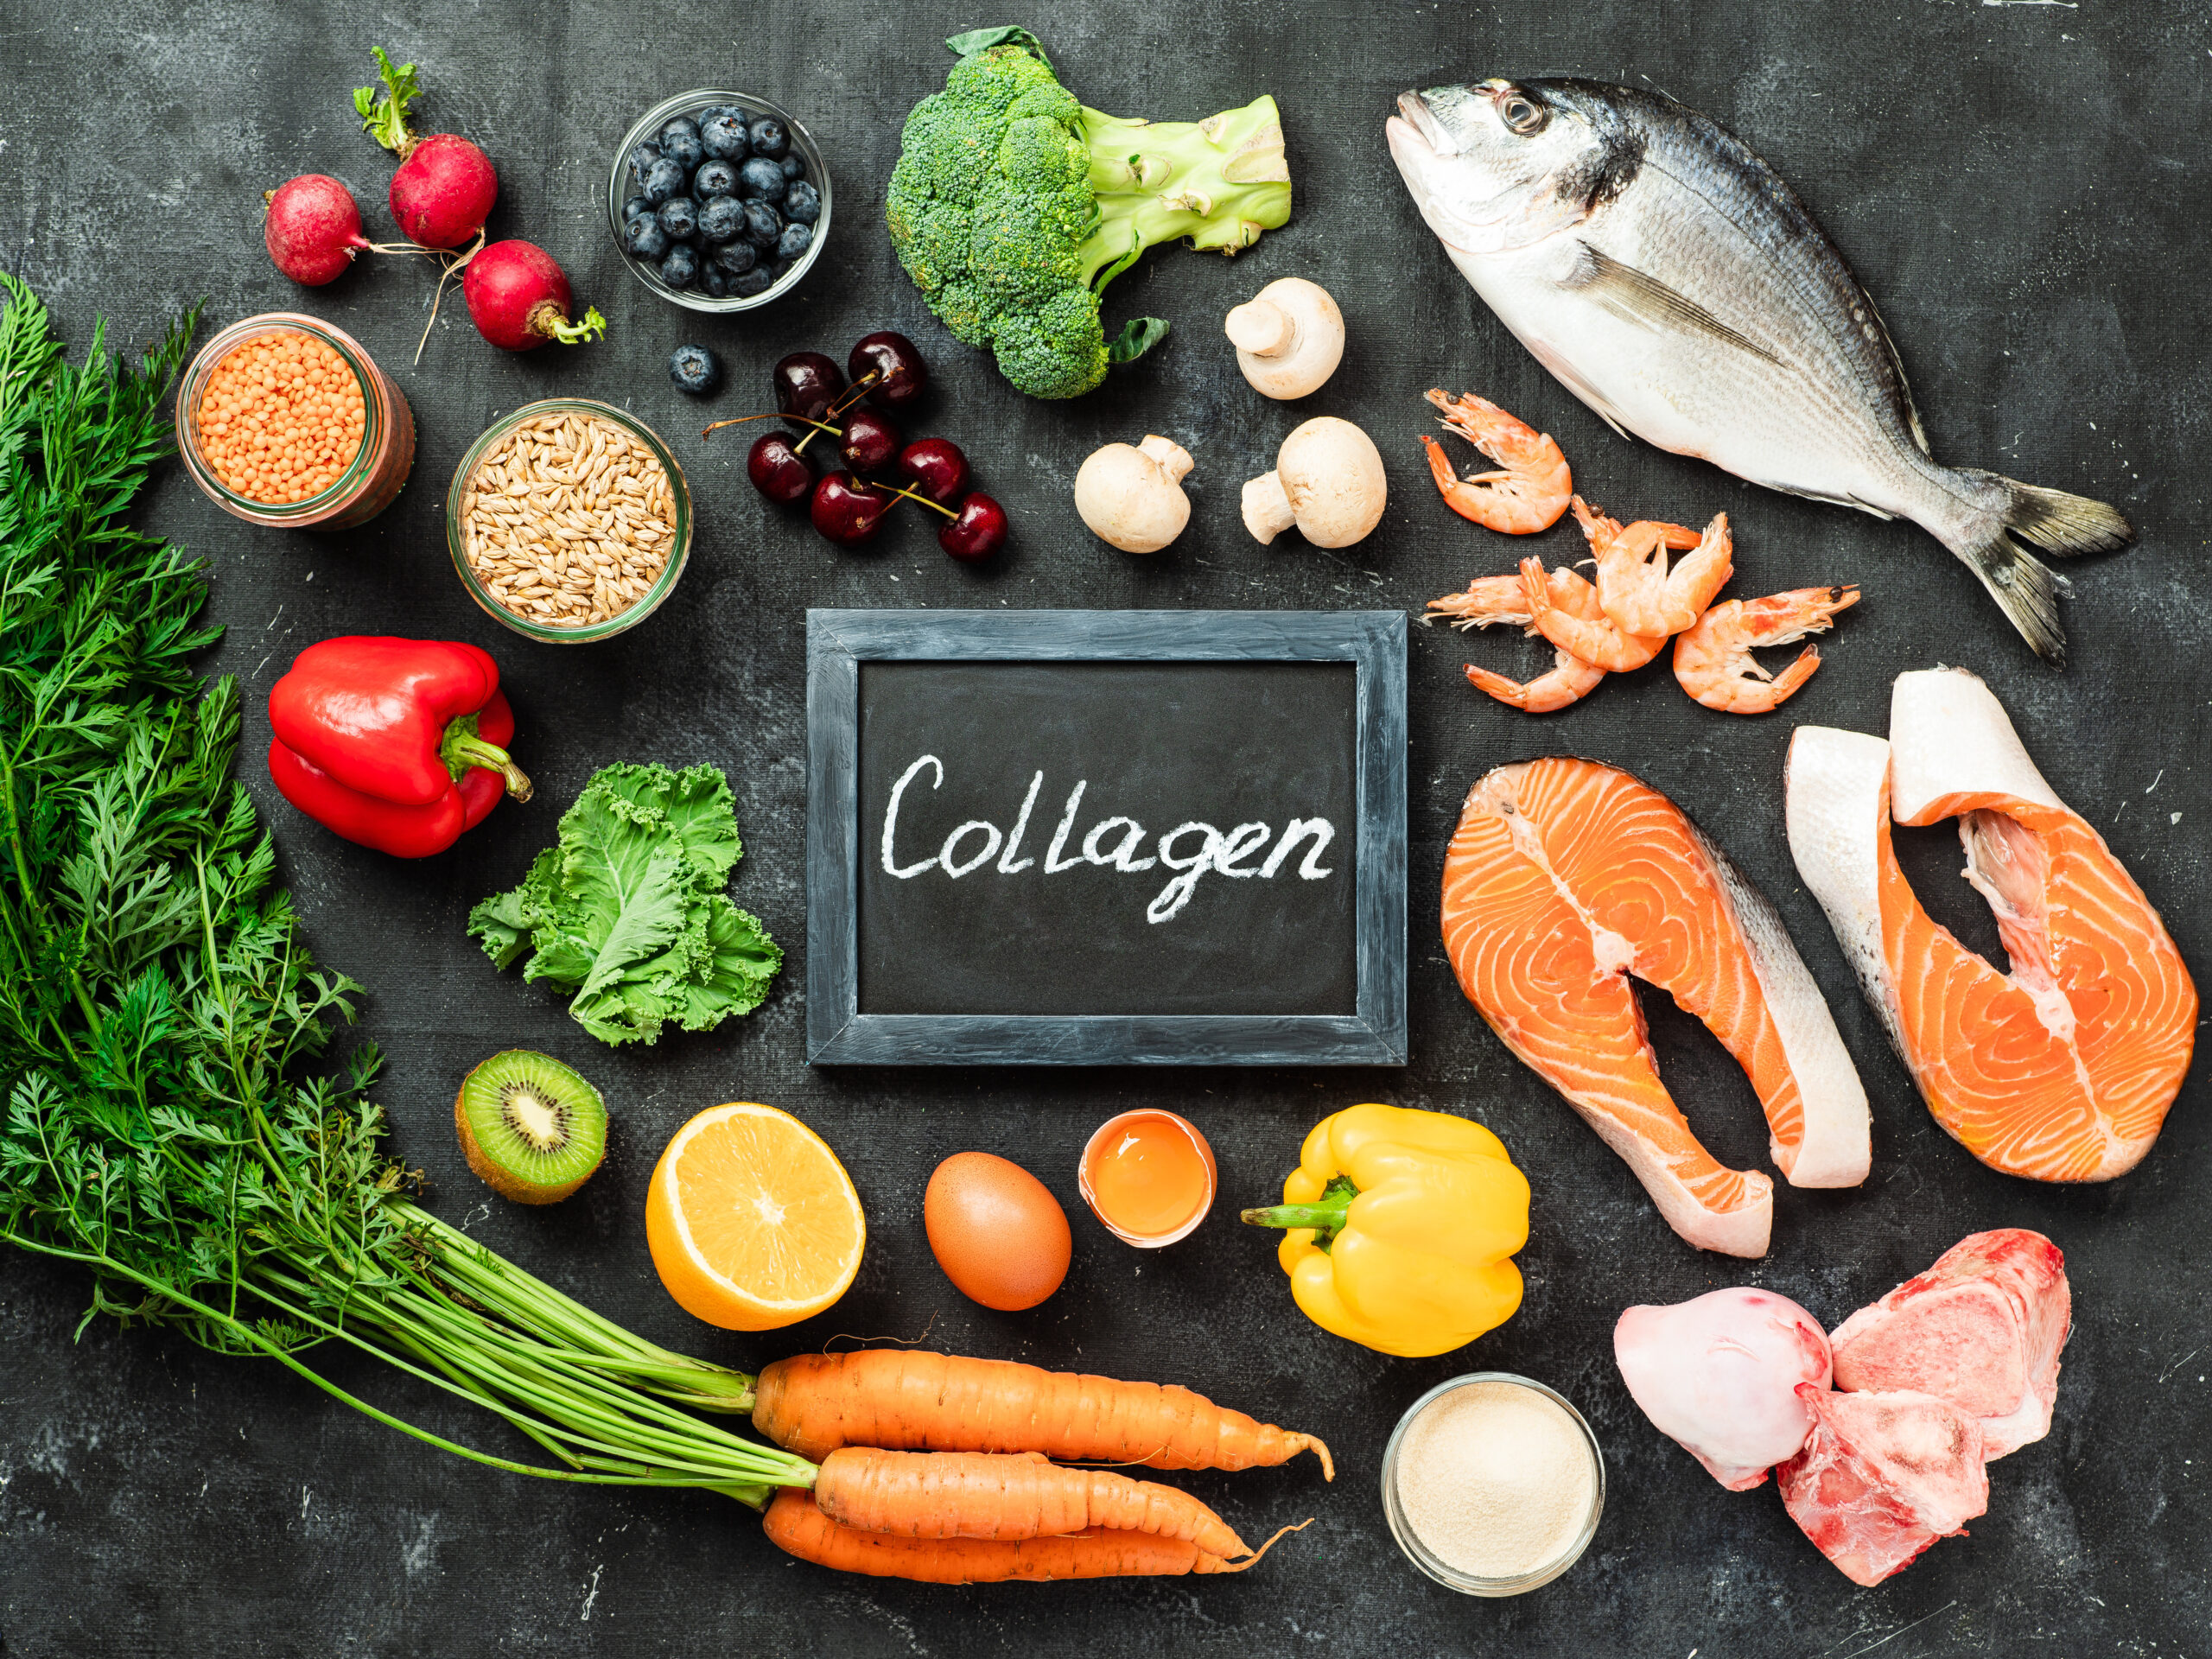 The word "collagen" surrounded by food types.